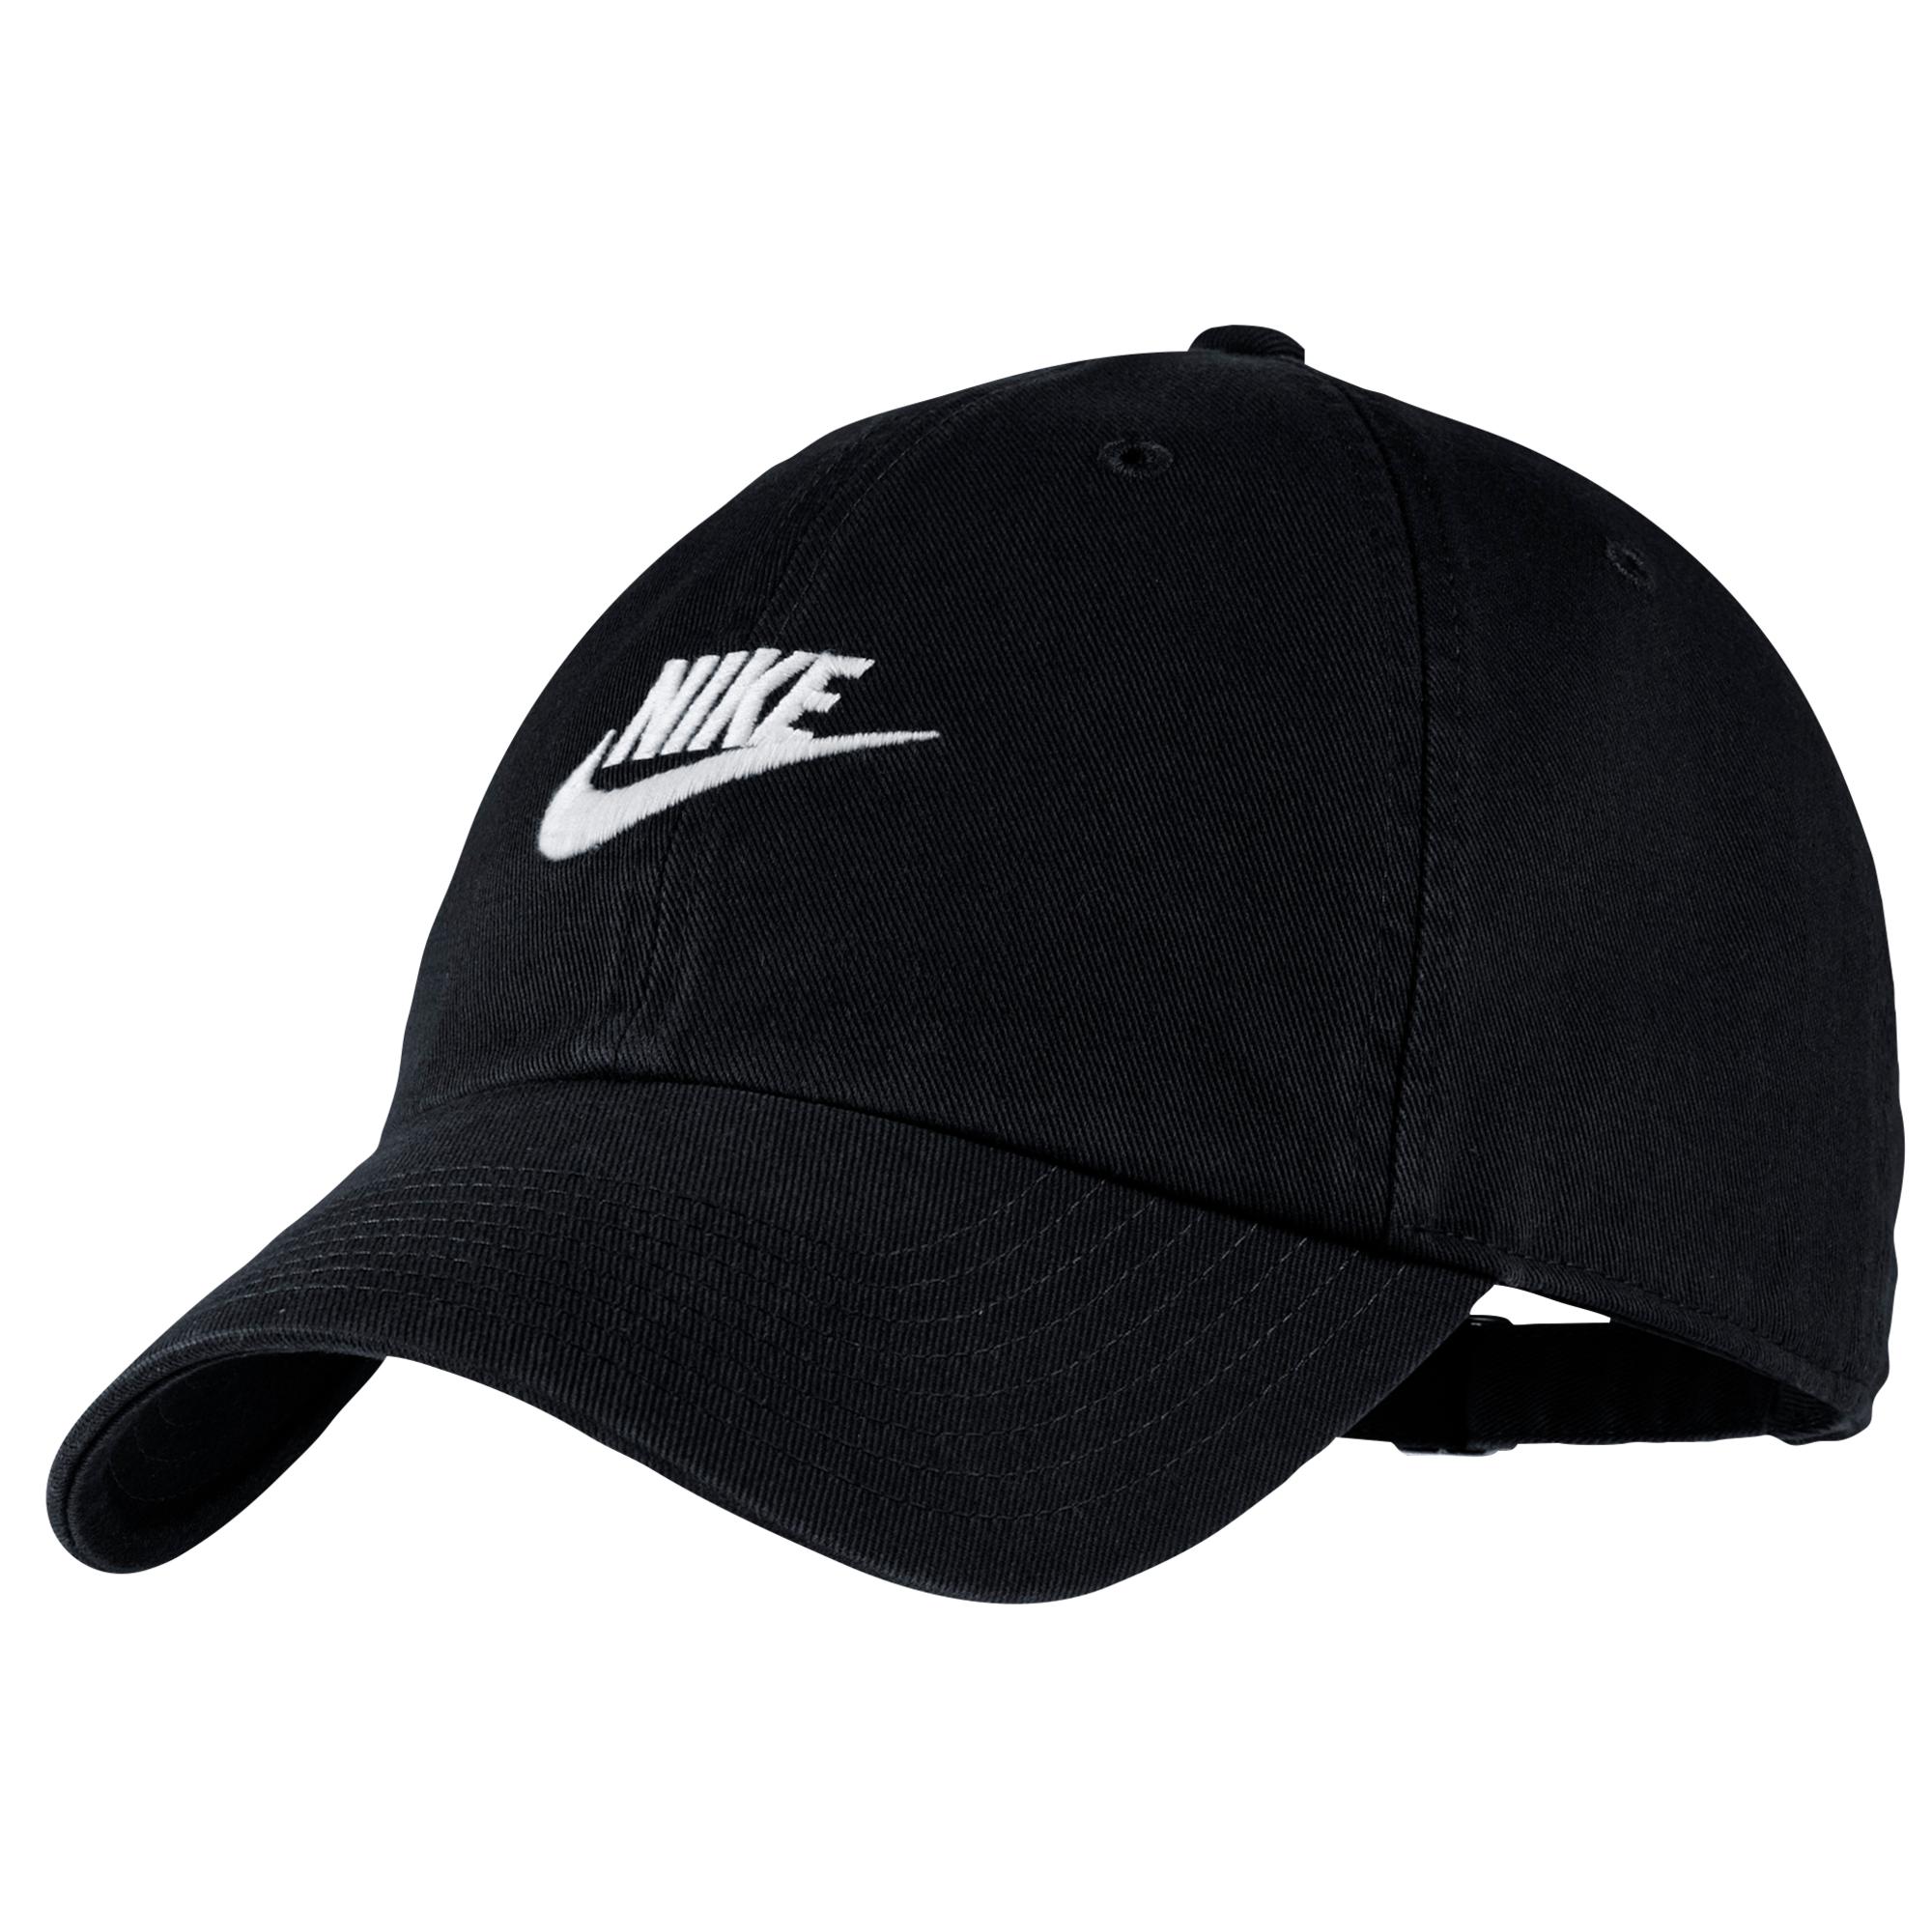 Nike Cotton H86 Futura Washed Cap in Black/White (Black) for Men - Lyst